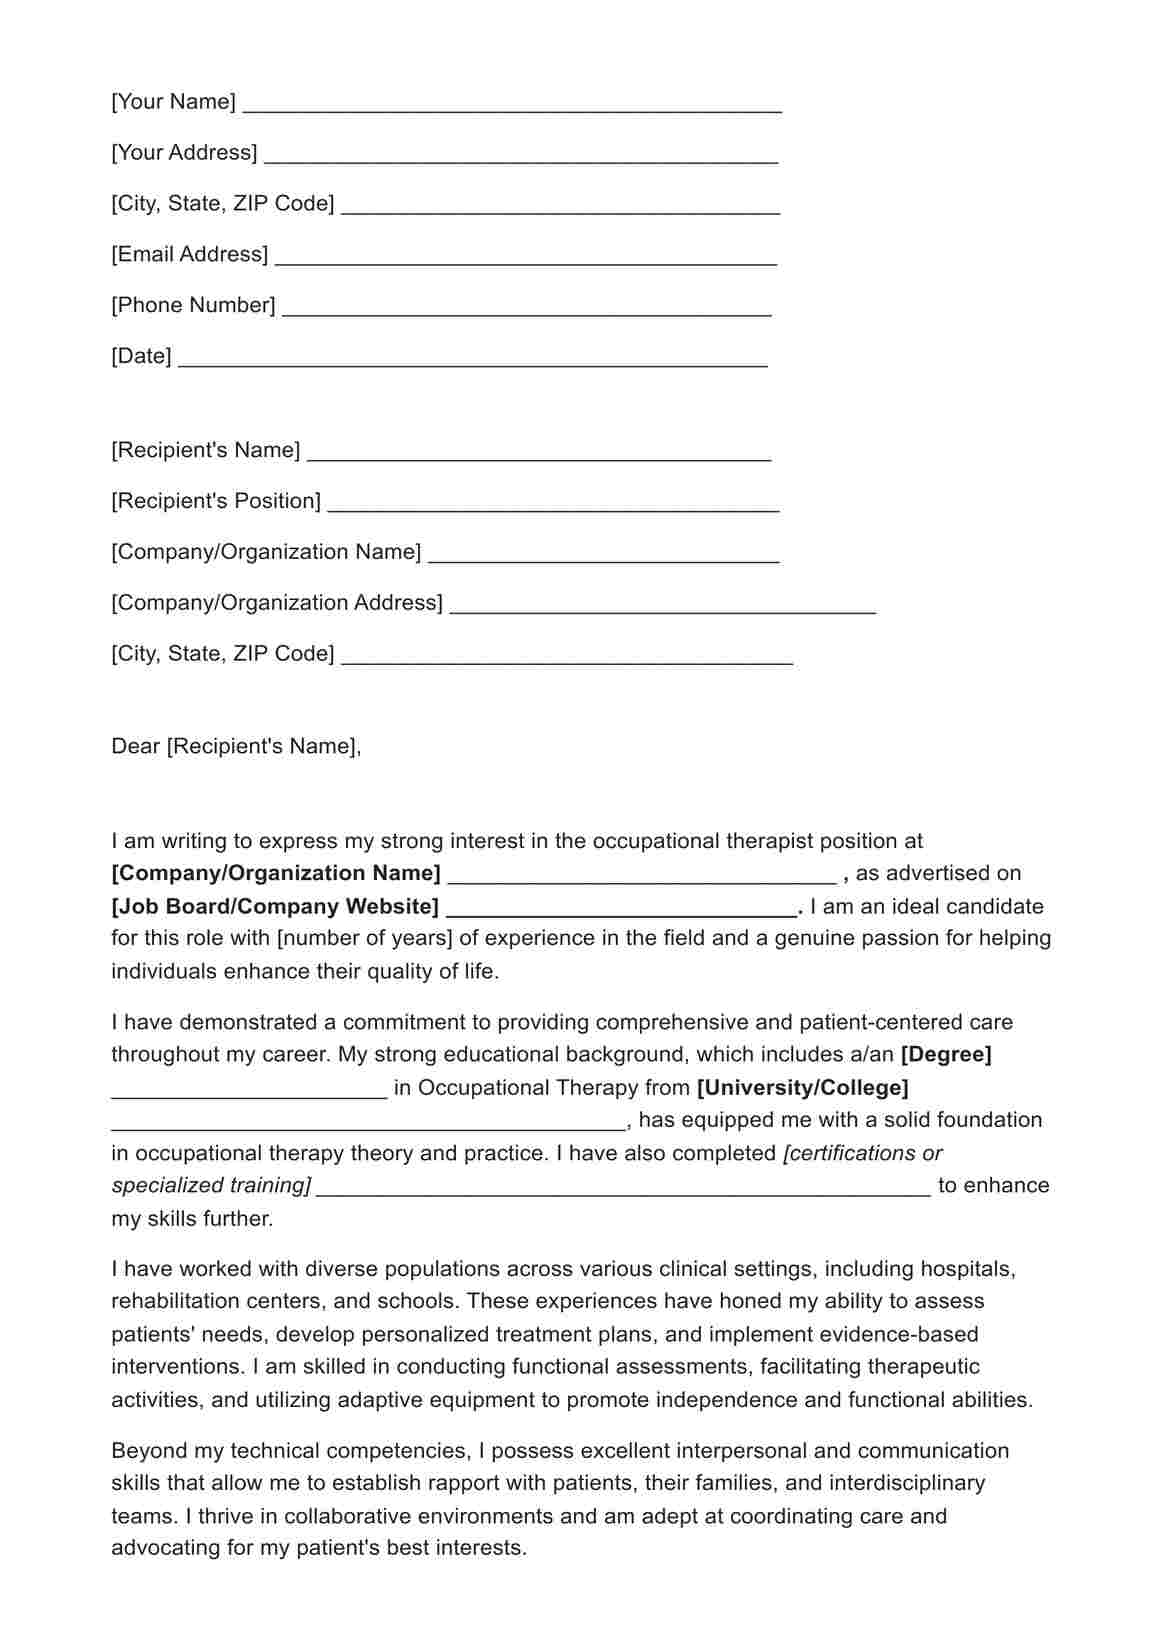 Occupational Therapy Cover Letter PDF Example